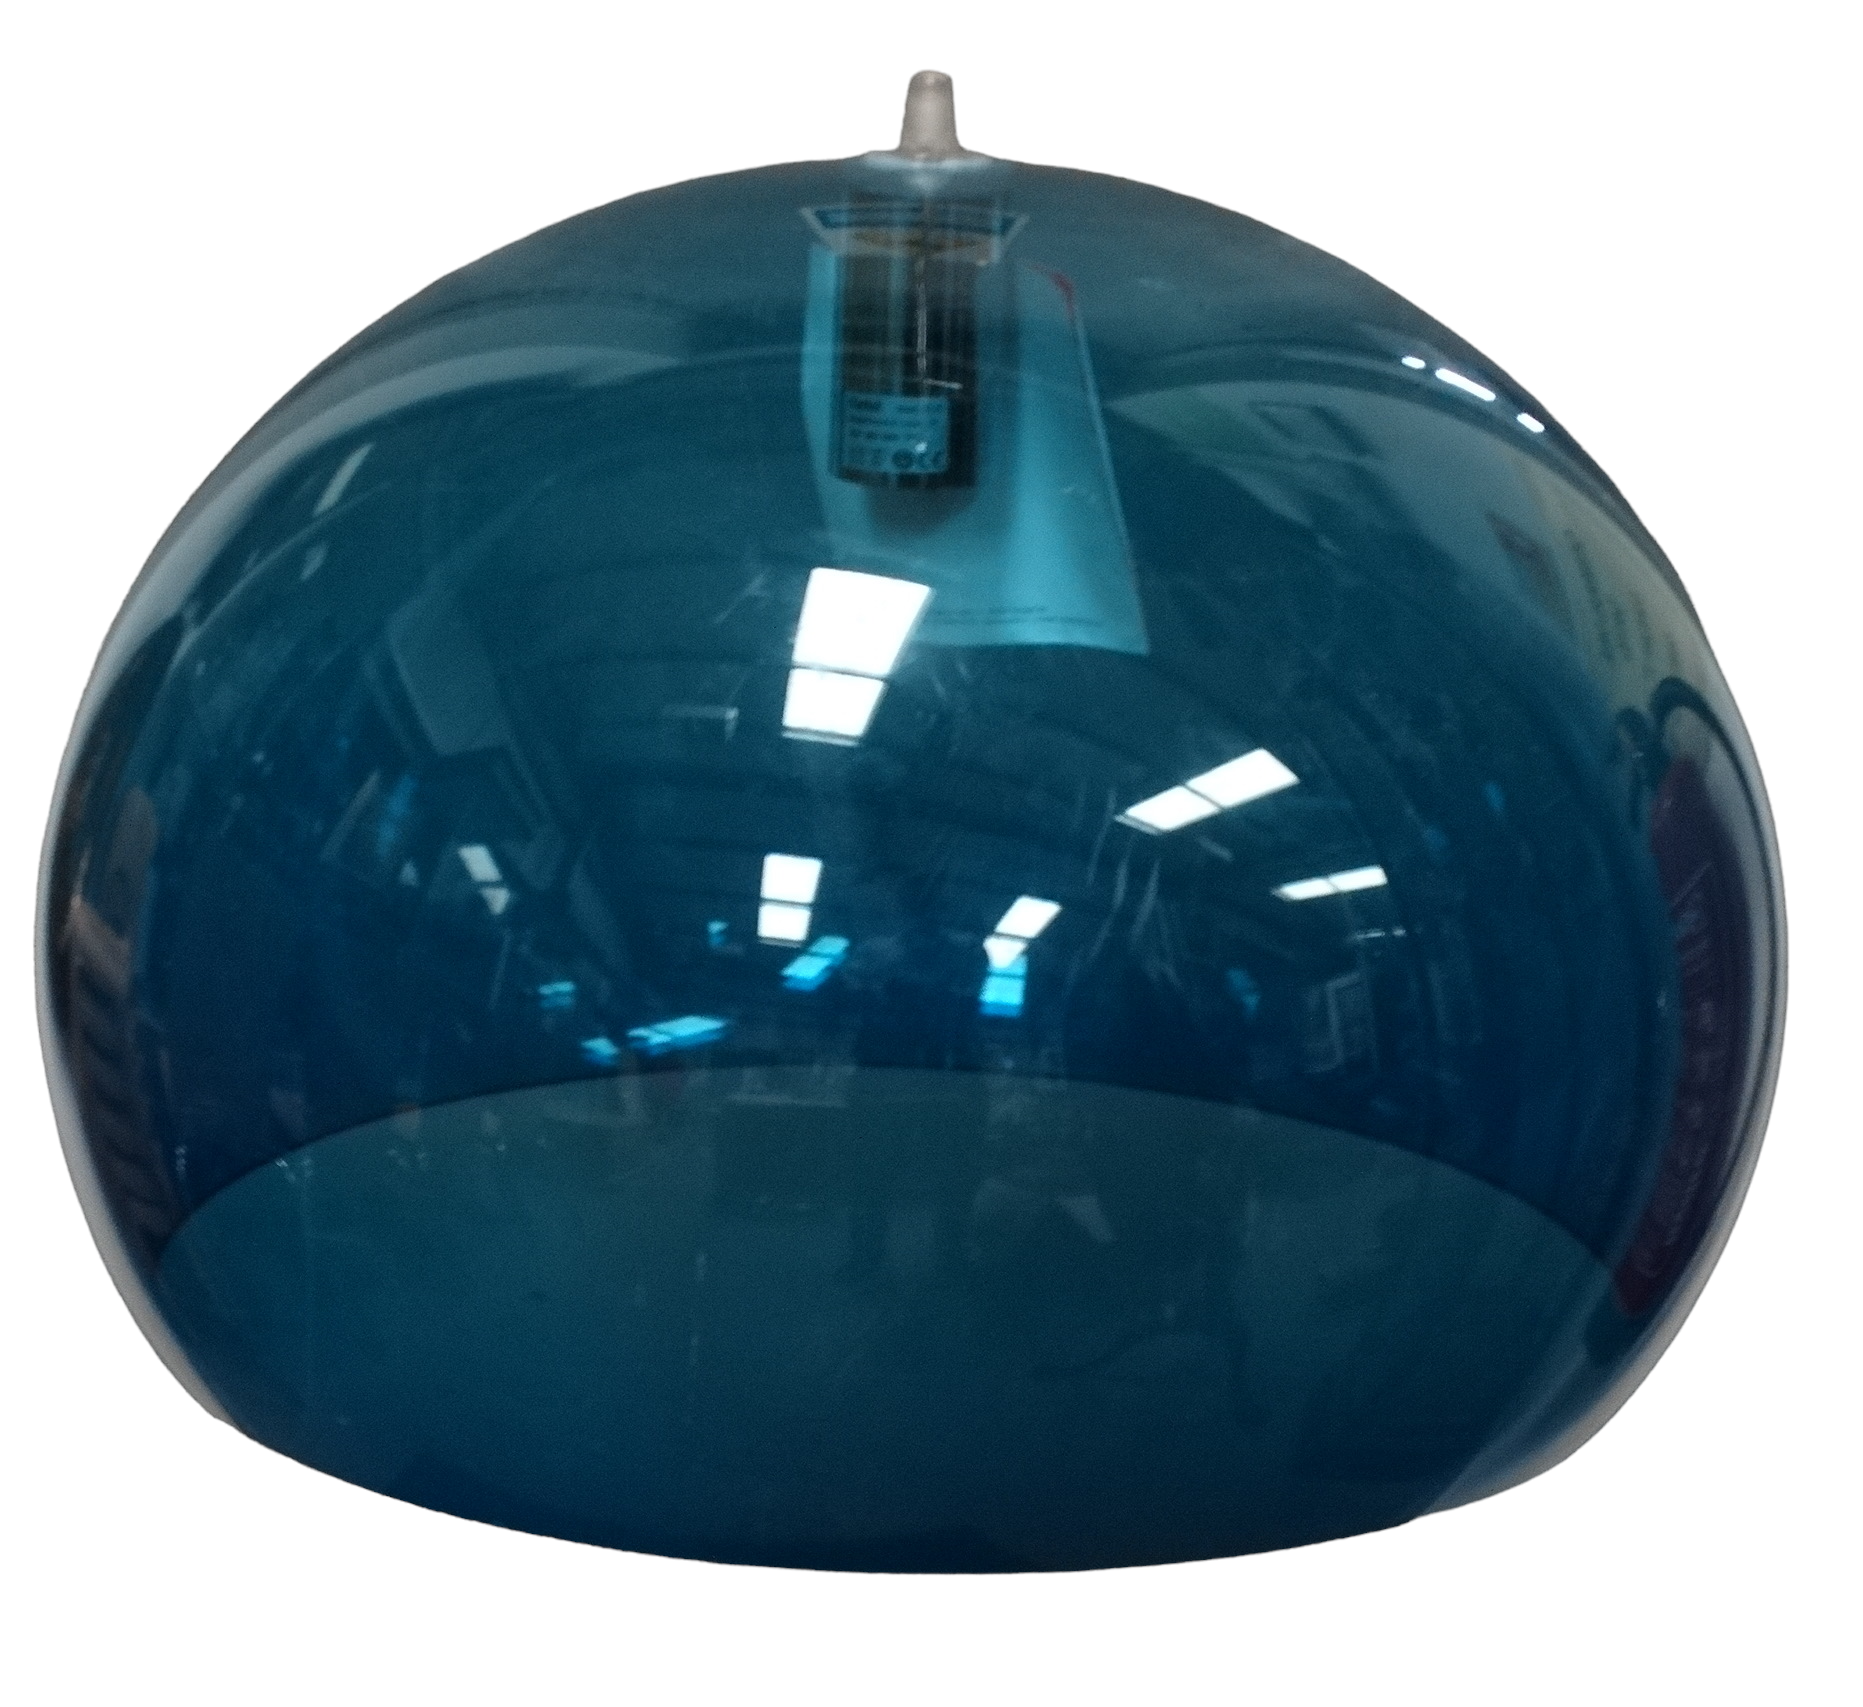 A Kartell blue perspex pendant light fitting - diameter 51cm, in original packaging and with